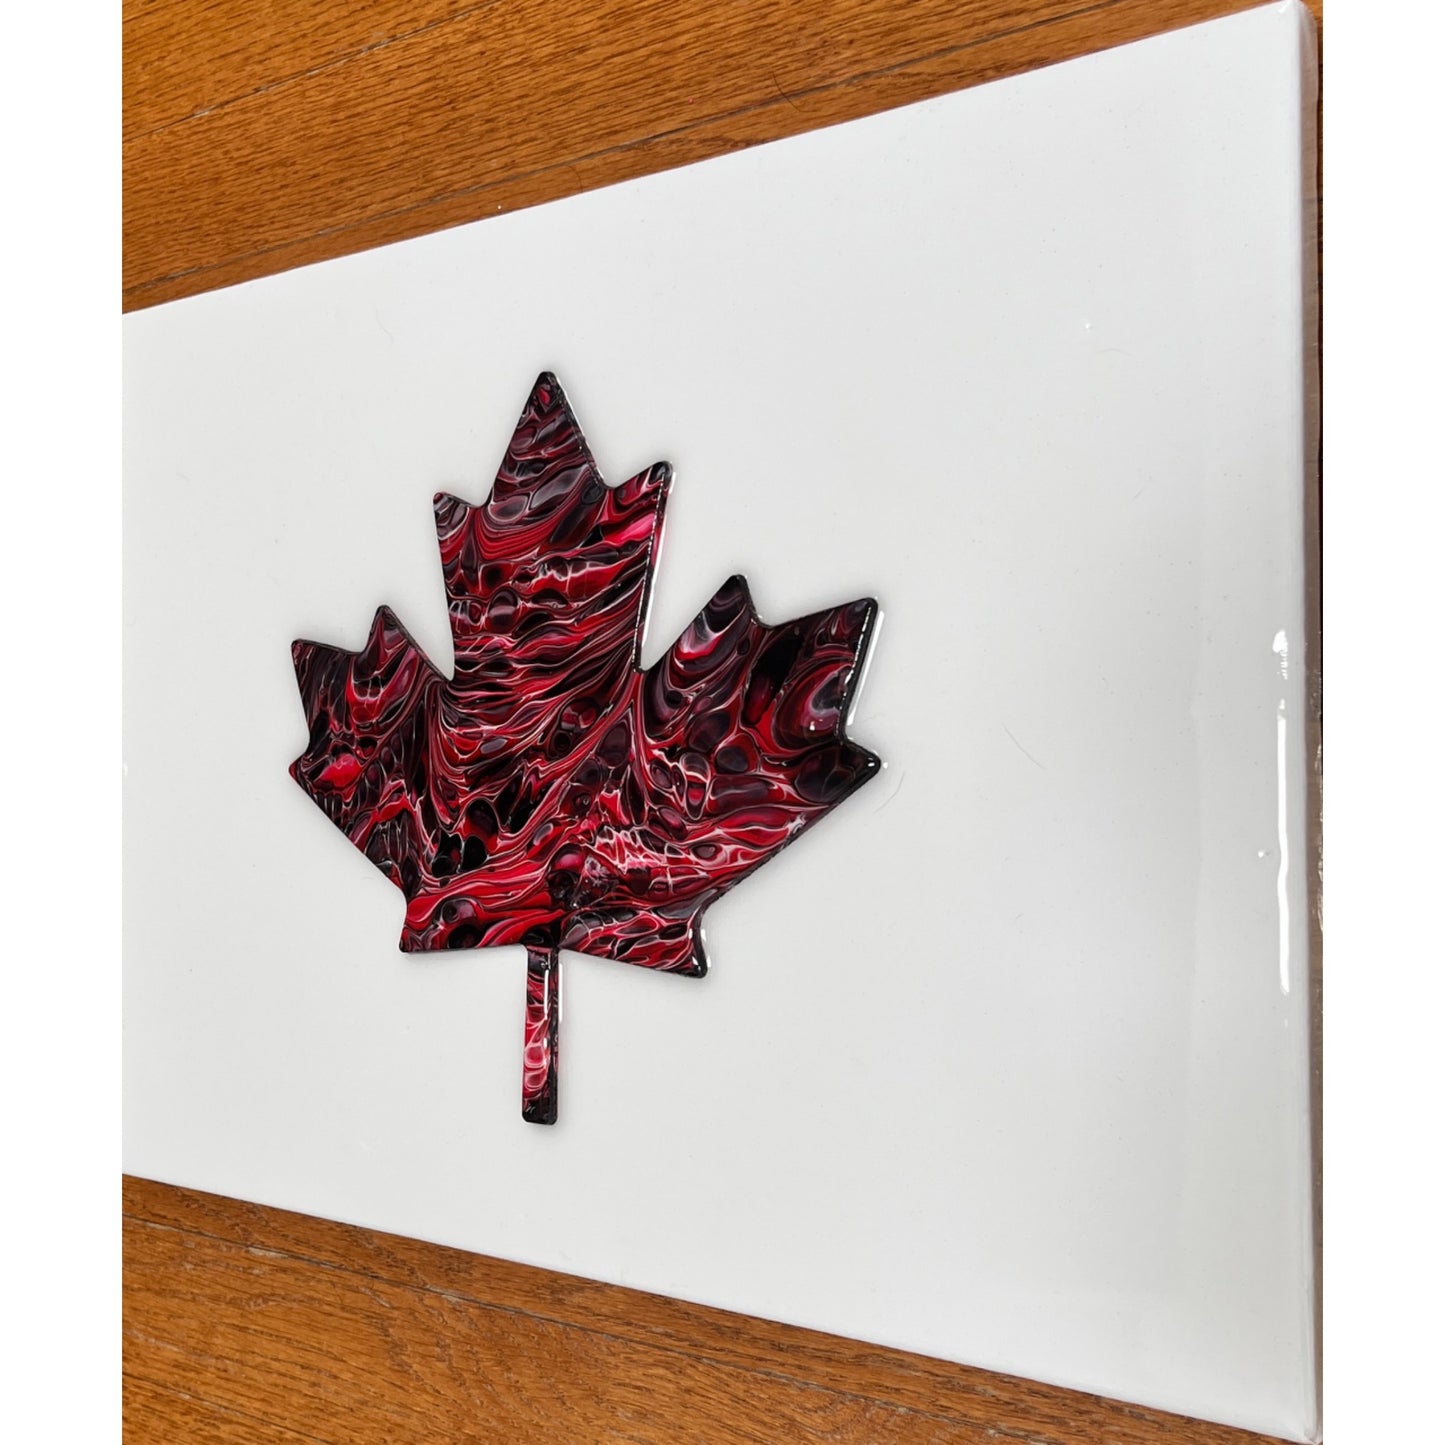 Black and white abstract cell art maple leaf on a white background. This image is of a stretched canvas print.